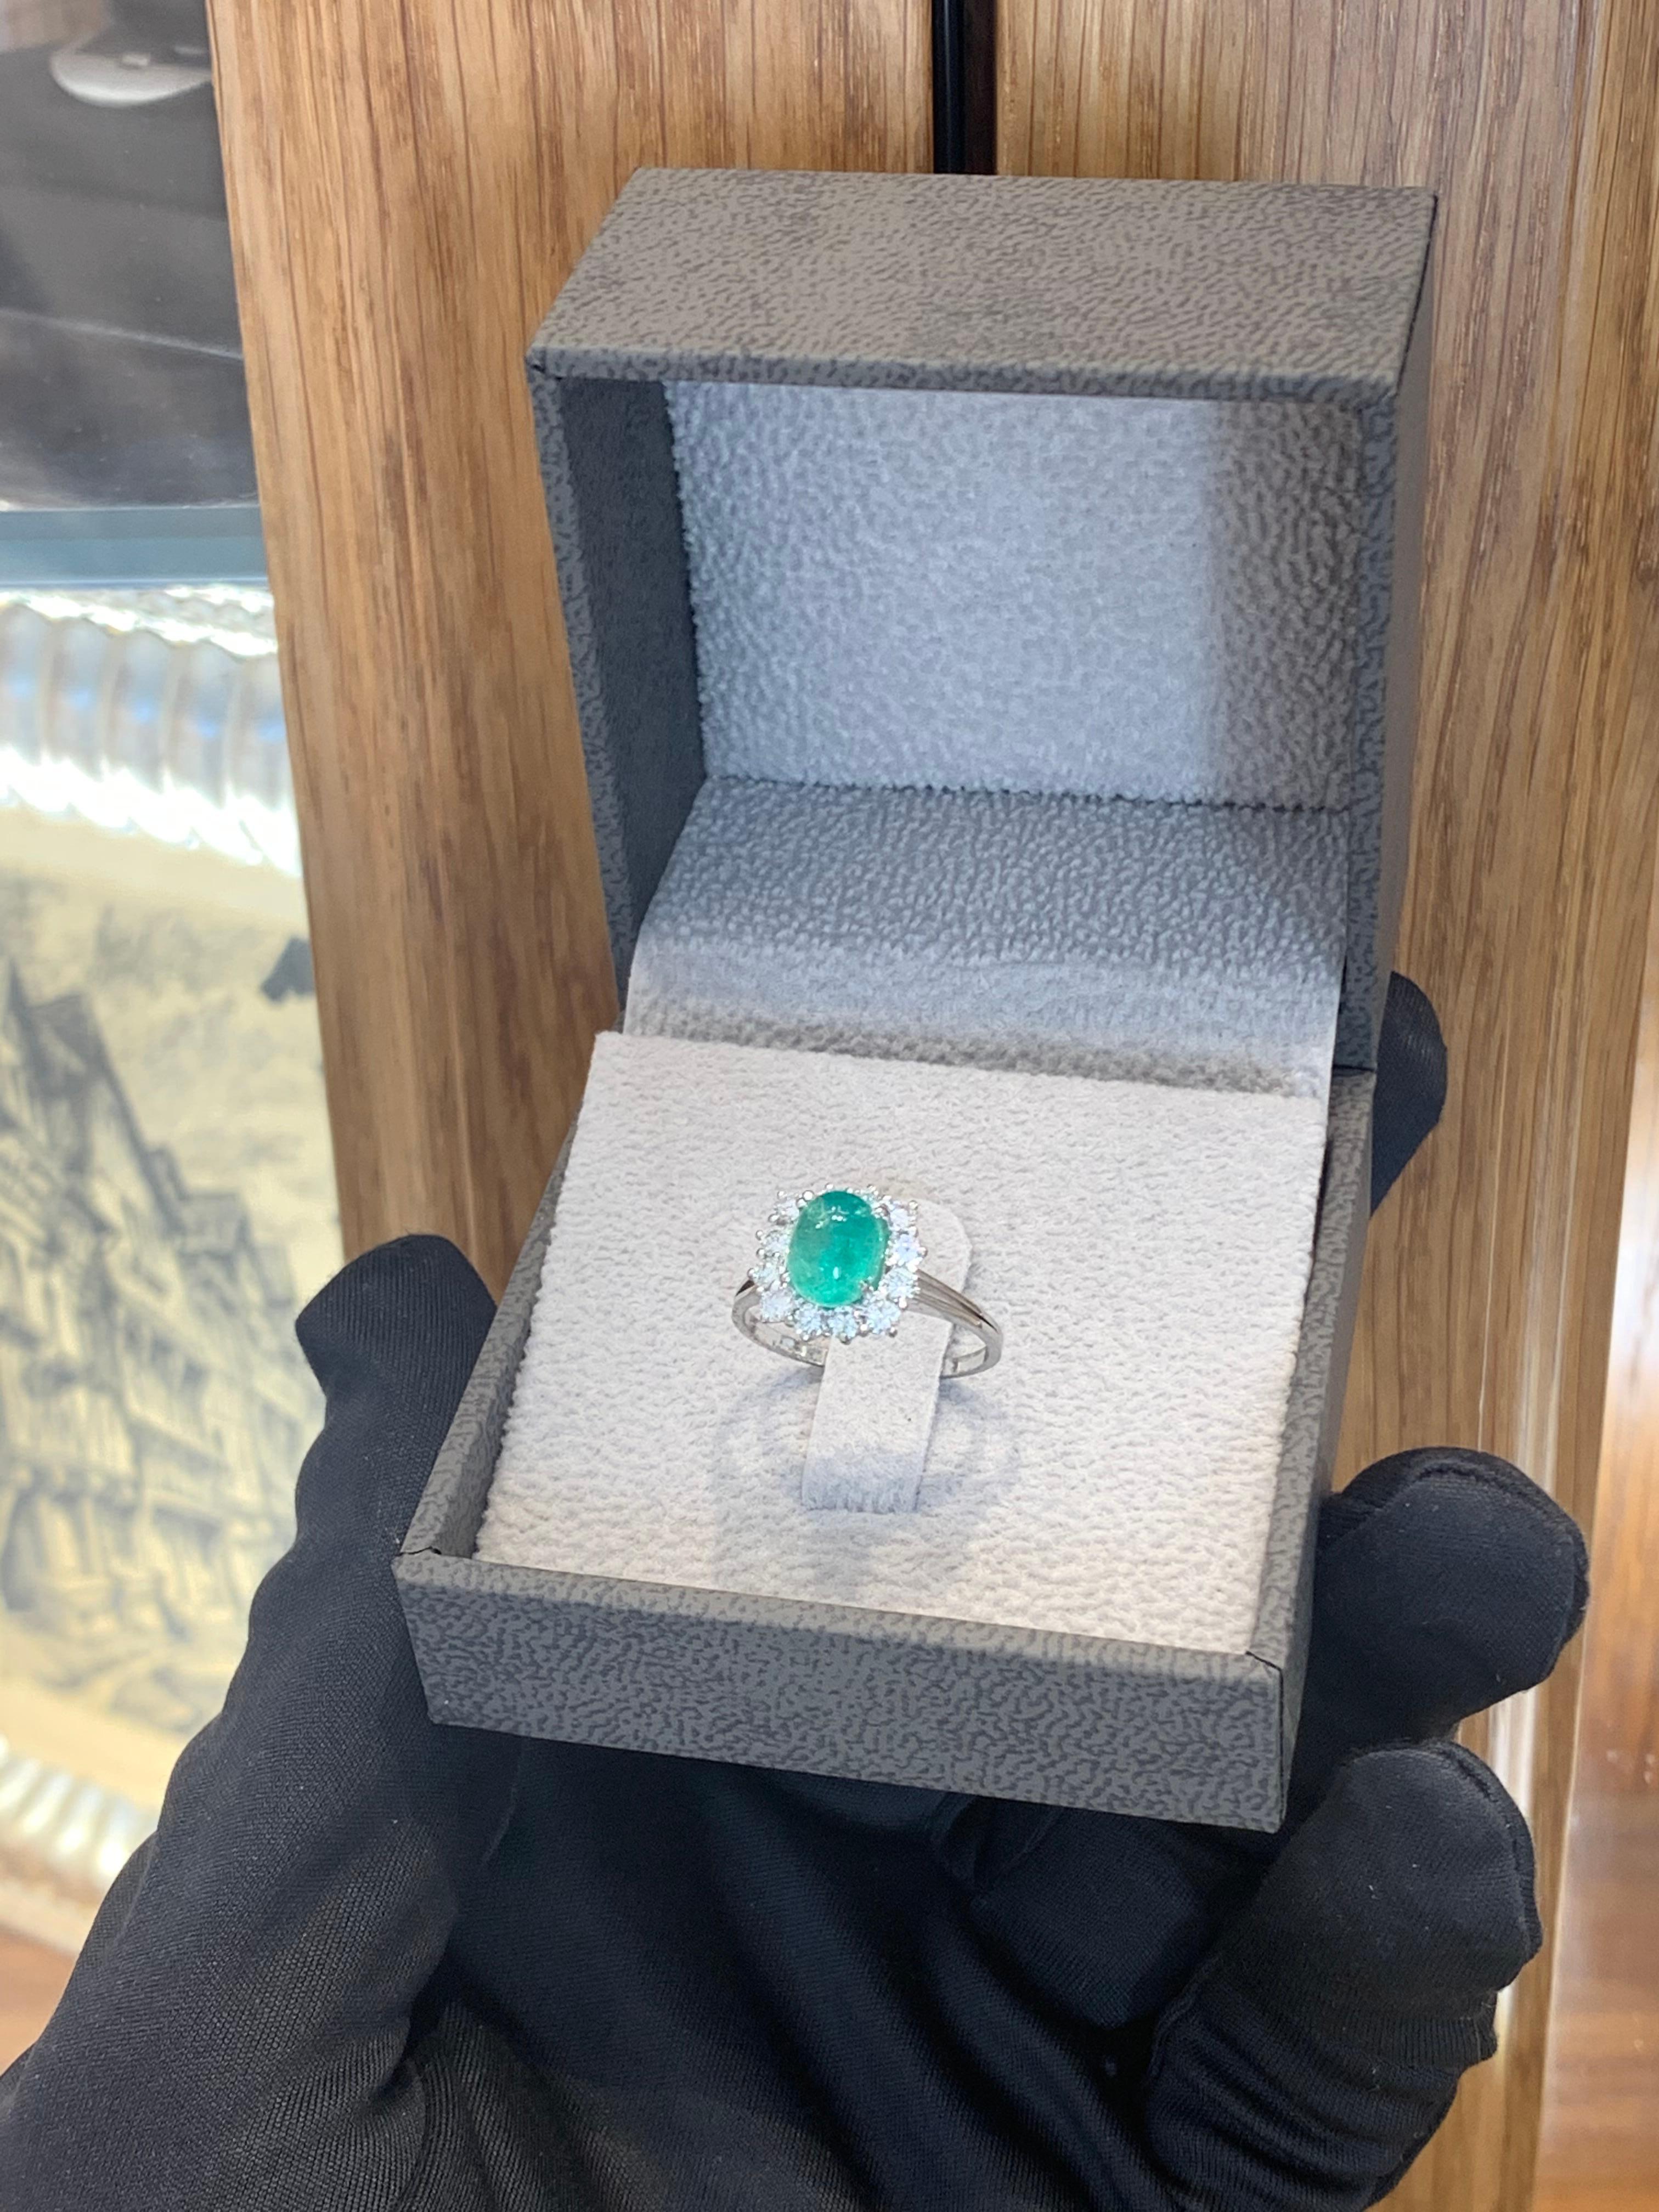 18k Gold 1.8 Carat Emerald & 1.0 Carat Diamond Ring In Excellent Condition For Sale In Ramat Gan, IL